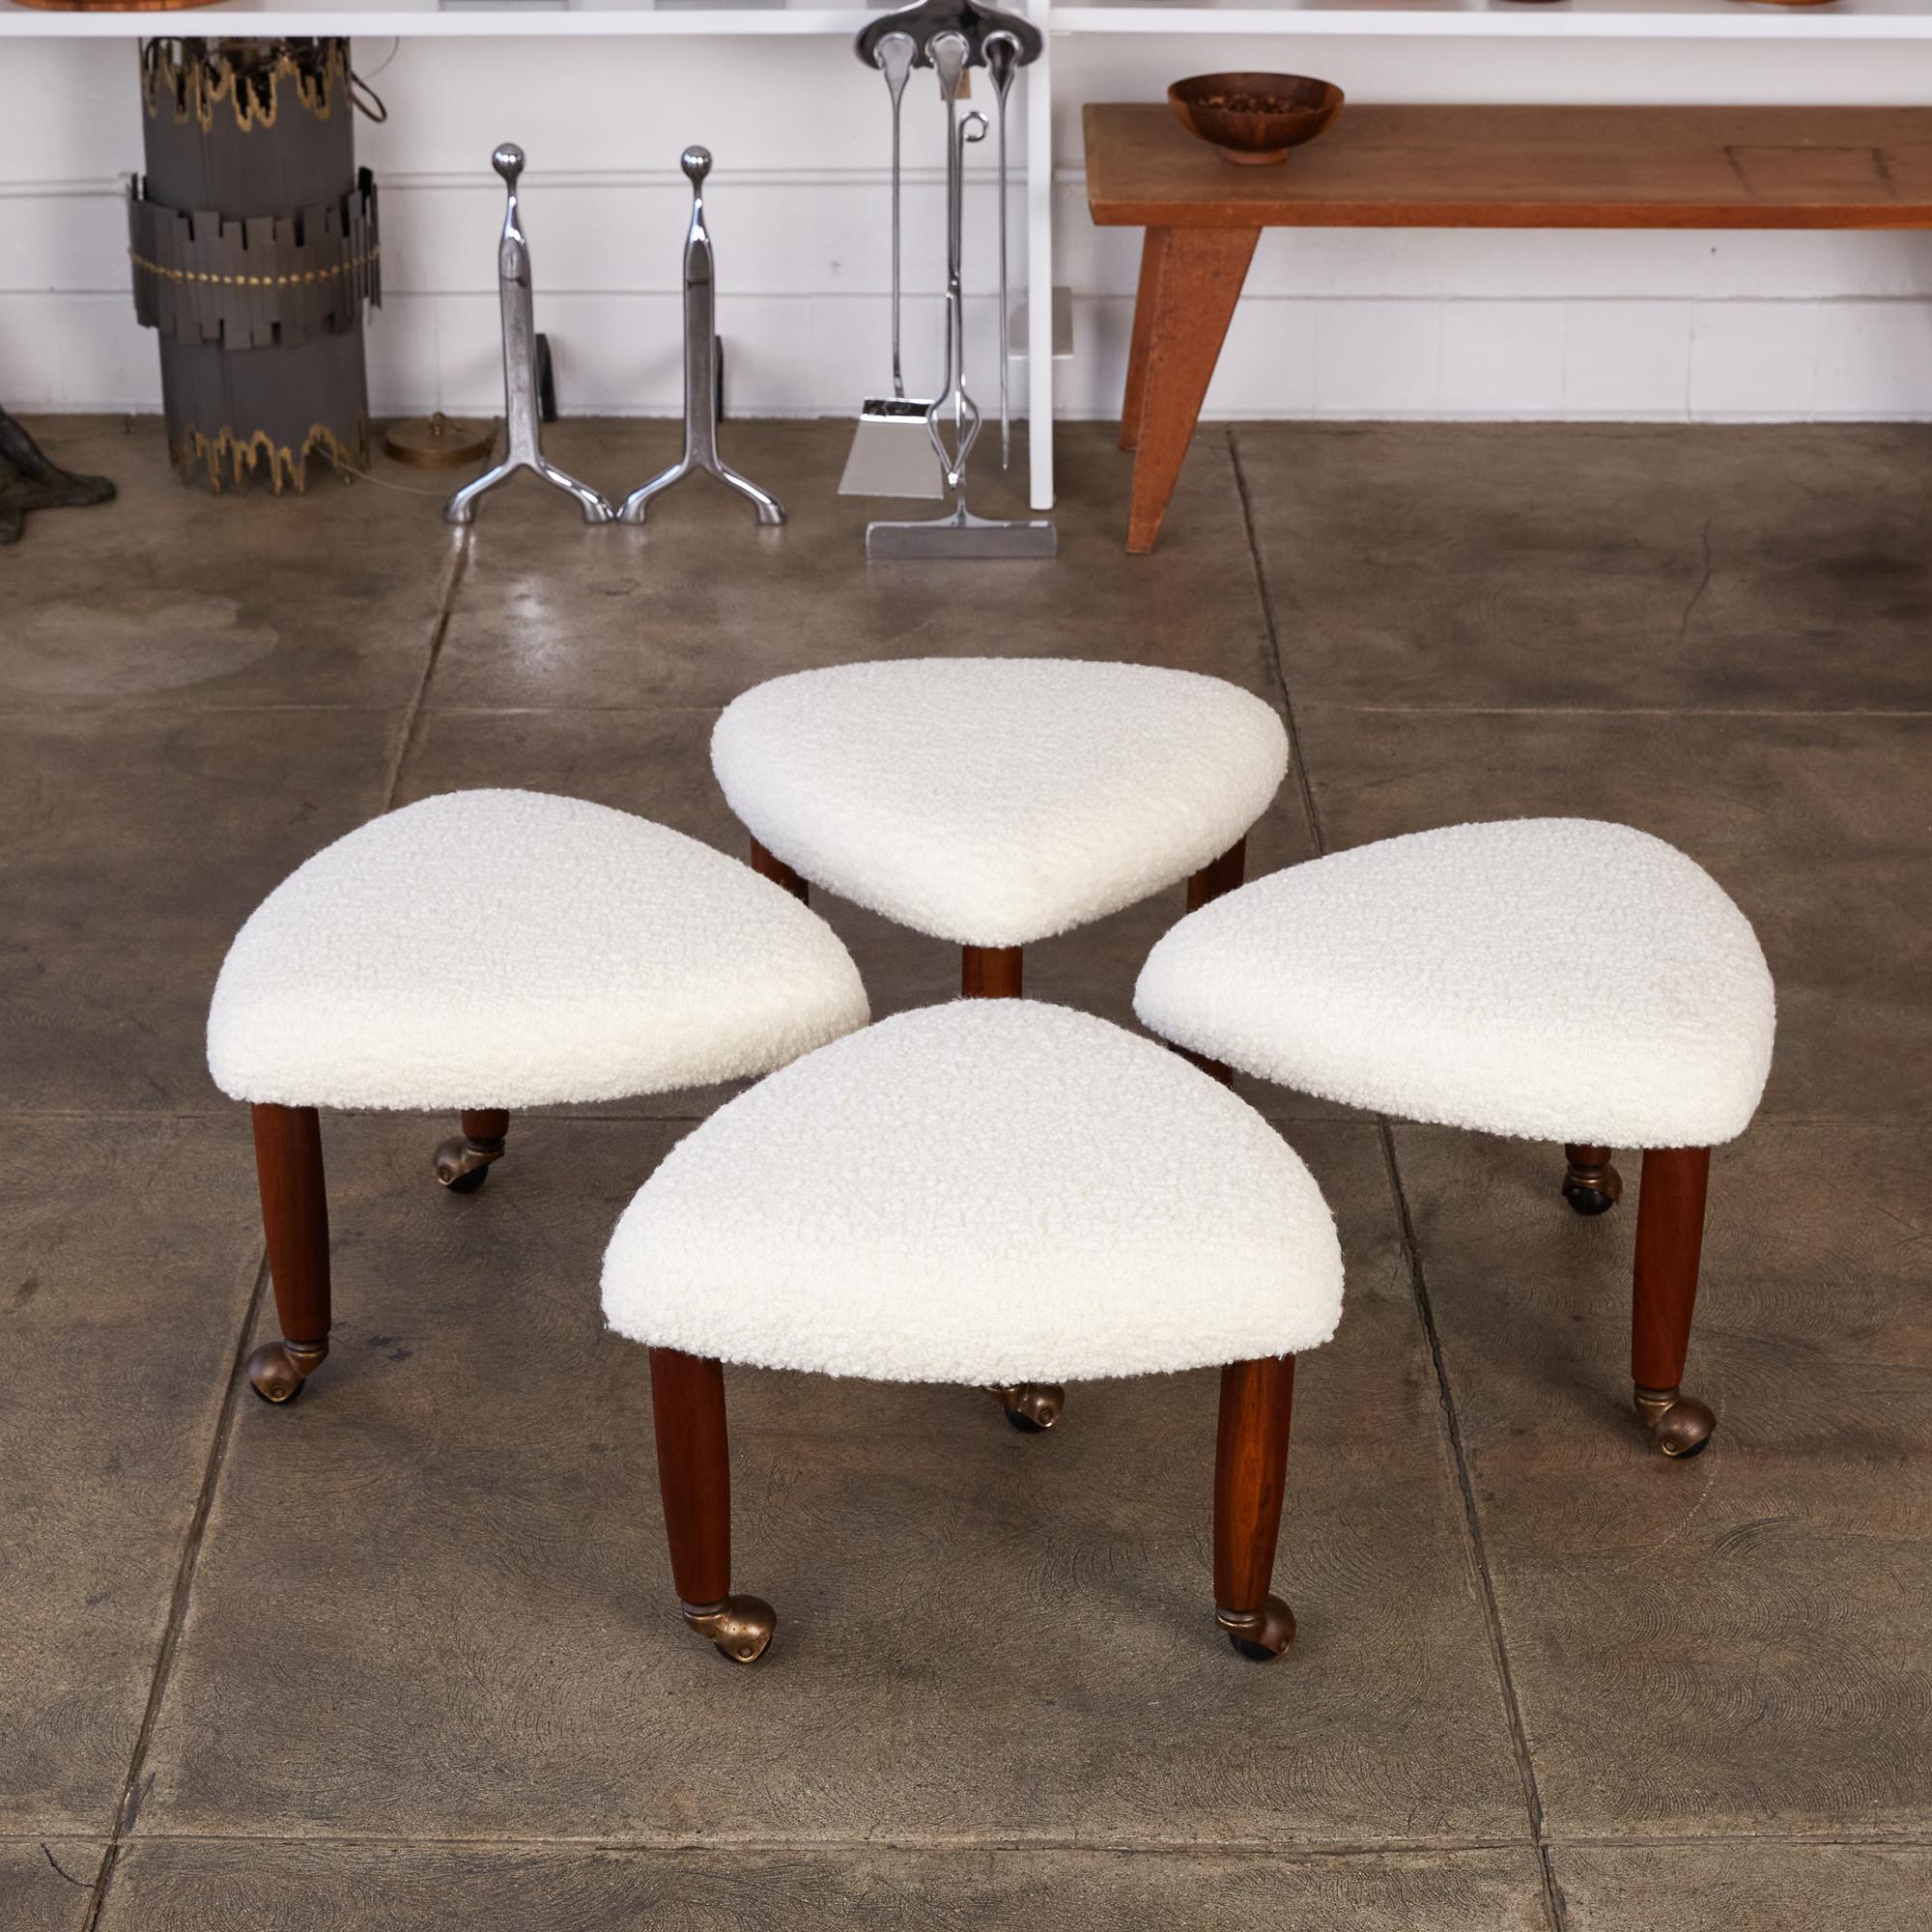 Adrian Pearsall for Craft Associates guitar pick stools. This set of four stools feature new white bouclé upholstery on their triangle shaped seats which sit upon three turned slightly tapered legs with round brass casters at their feet. These were